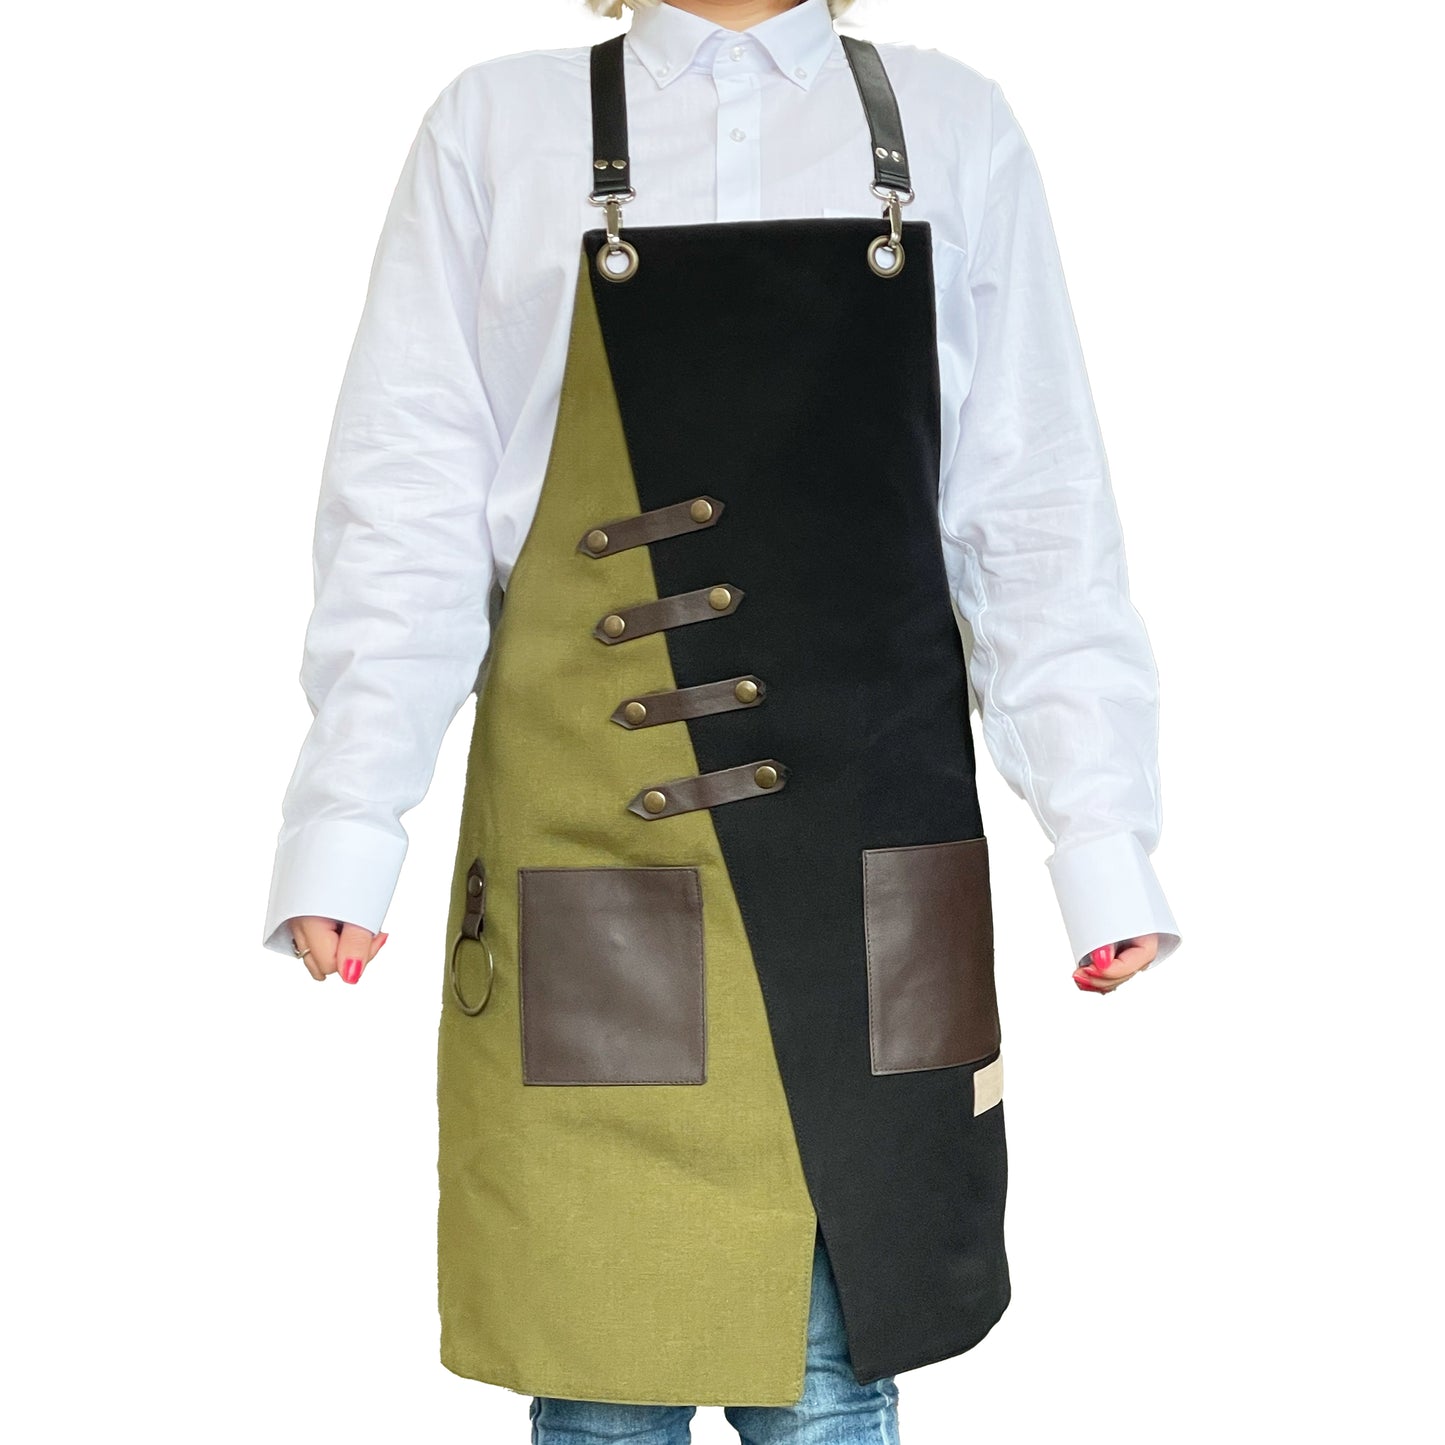 Utility Apron By Zouhad Black and Olive Green